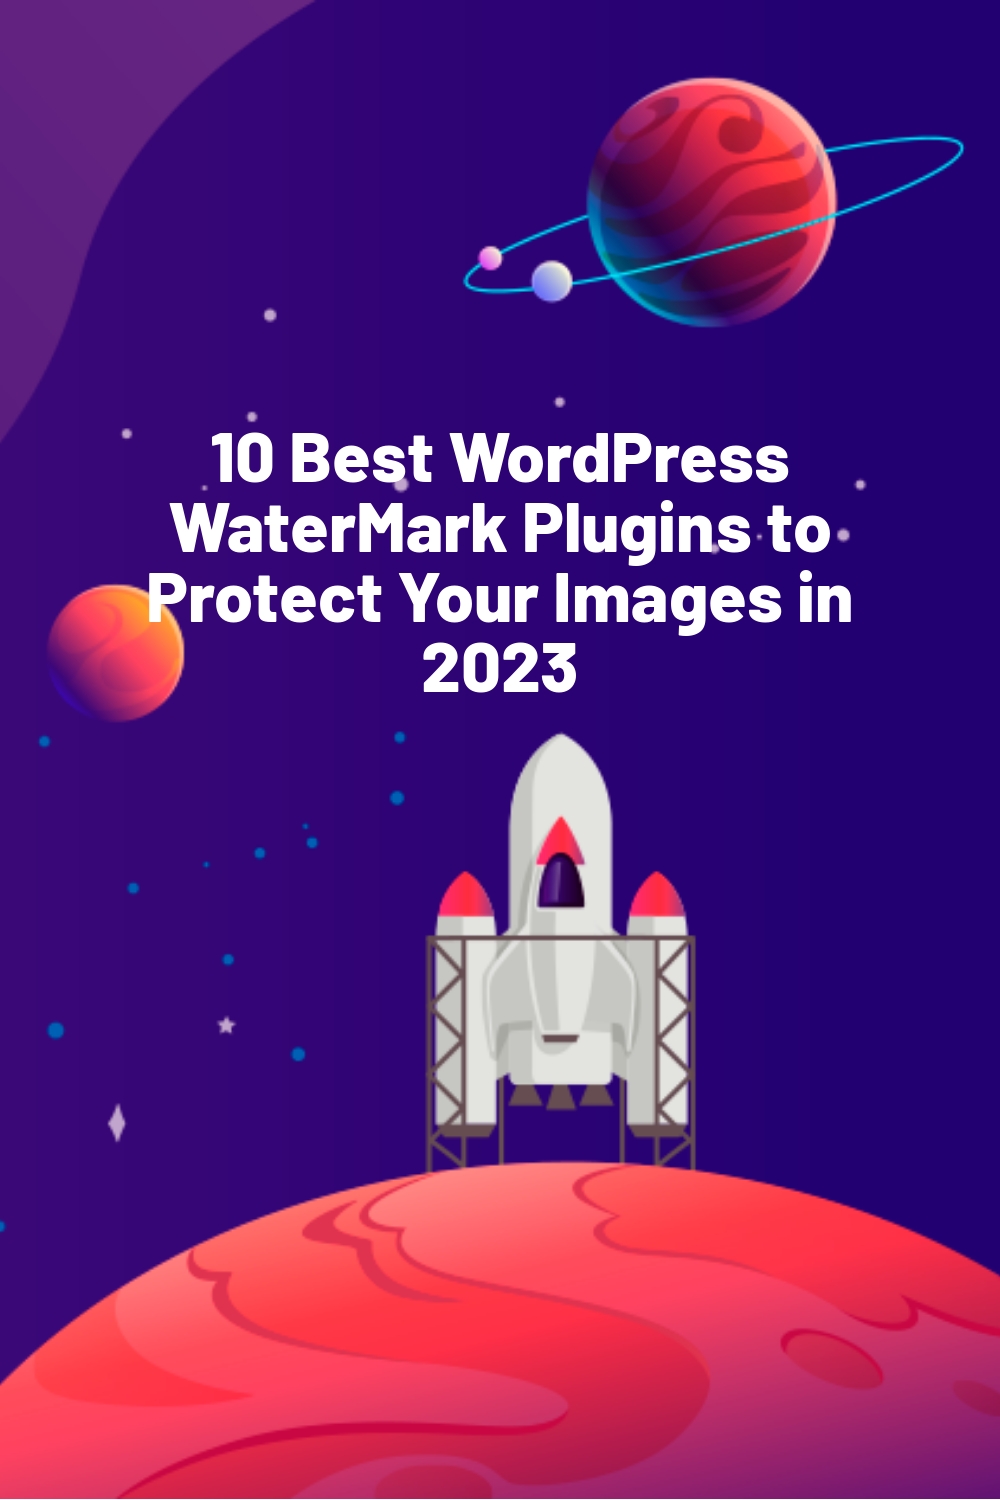 10 Best WordPress WaterMark Plugins to Protect Your Images in 2023